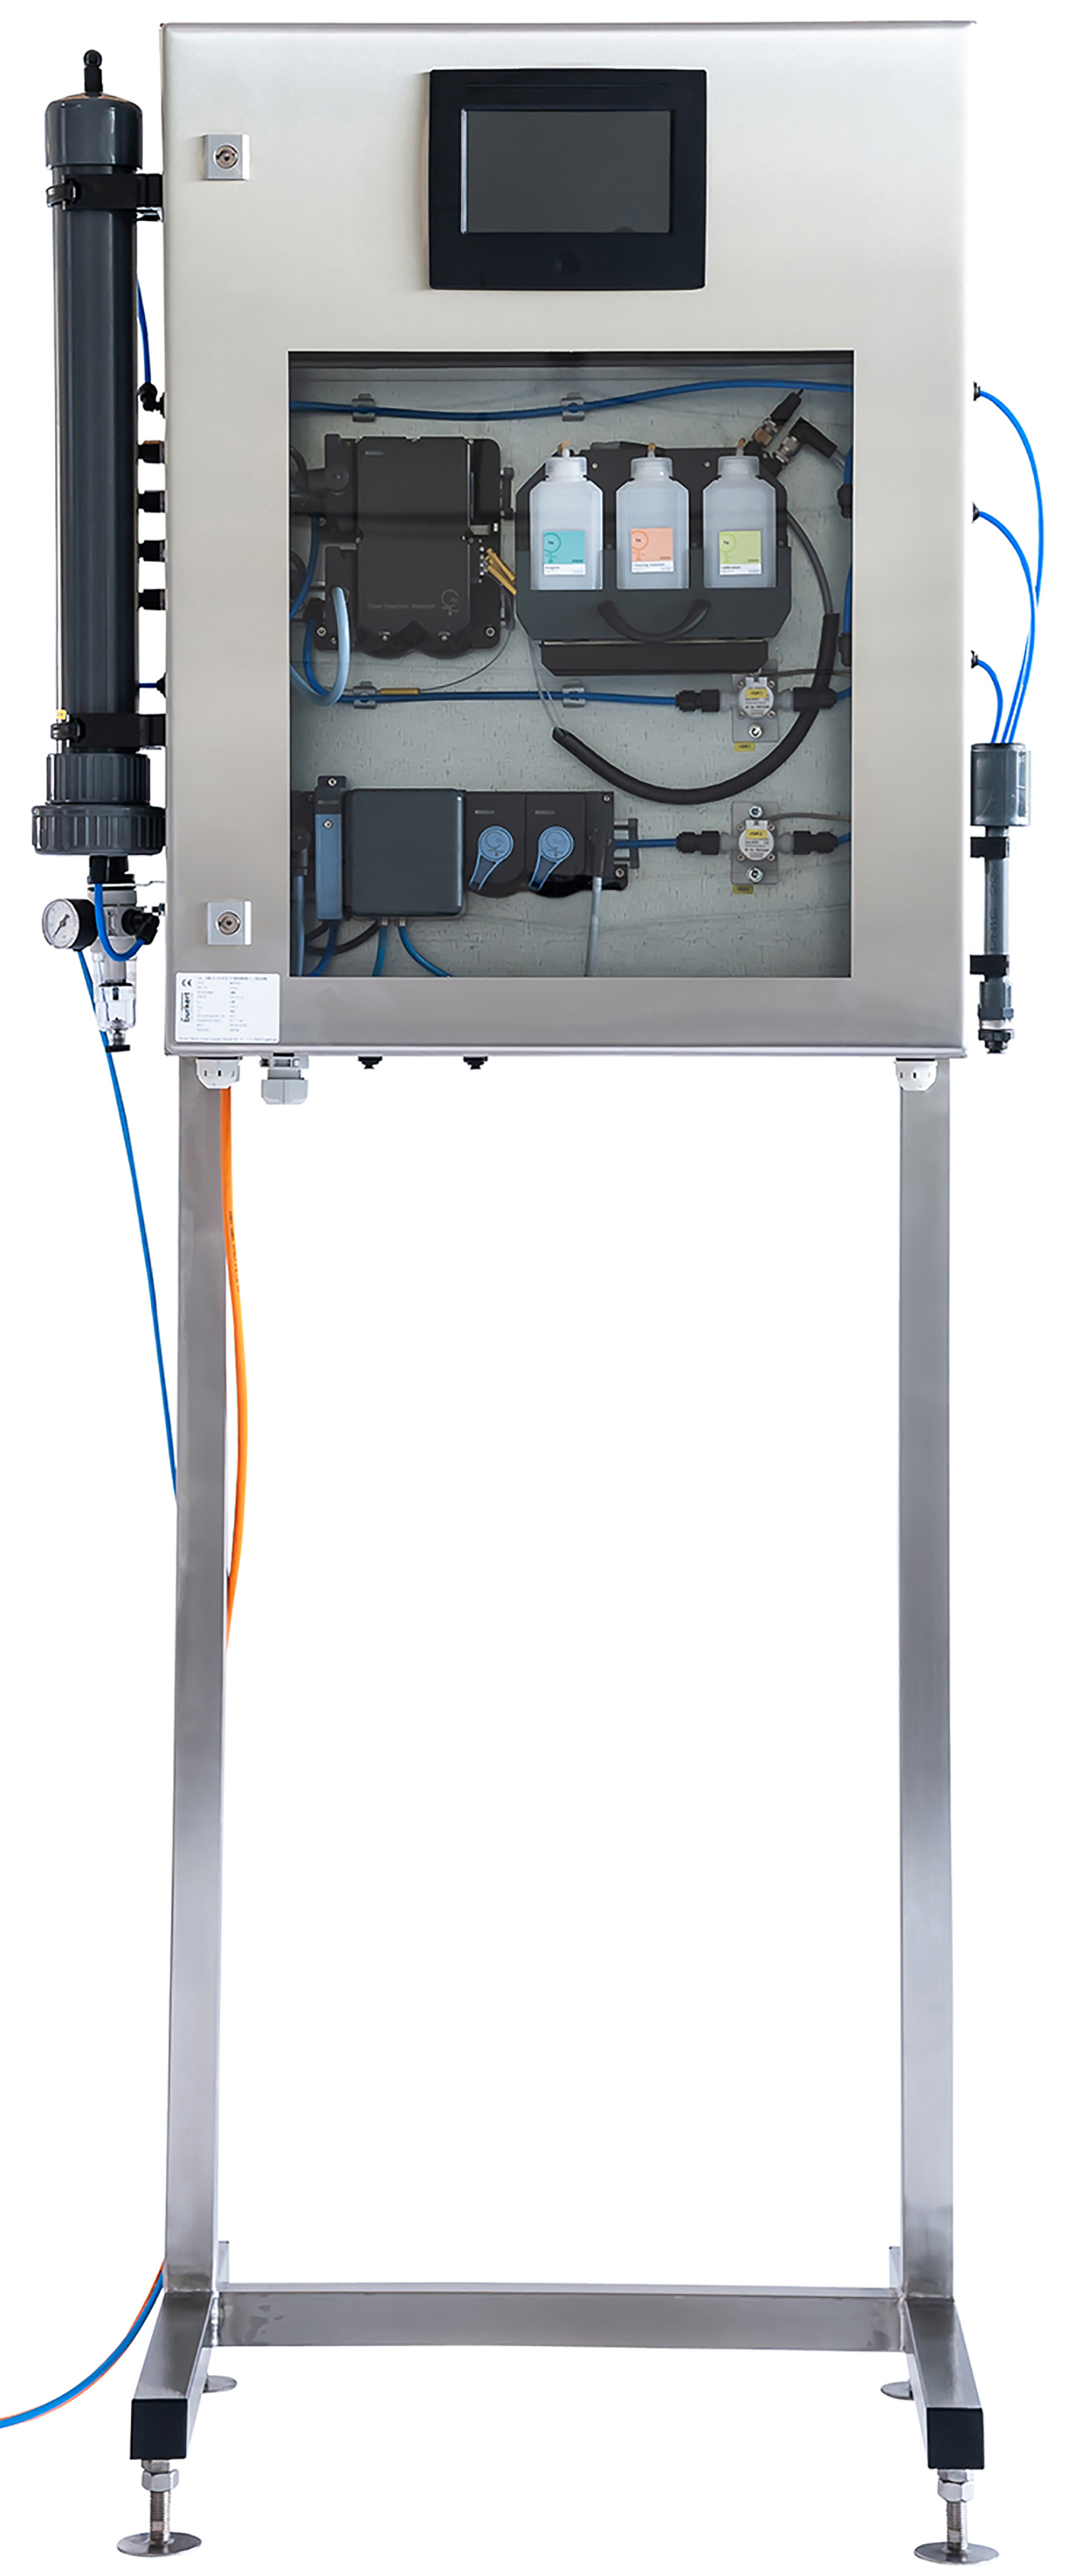 The Type 8905, equipped with the MS06 iron sensor, offers the opportunity to monitor water quality automatically in both open and closed loop applications and ensure chemical dosing and filtration processes are operating as required